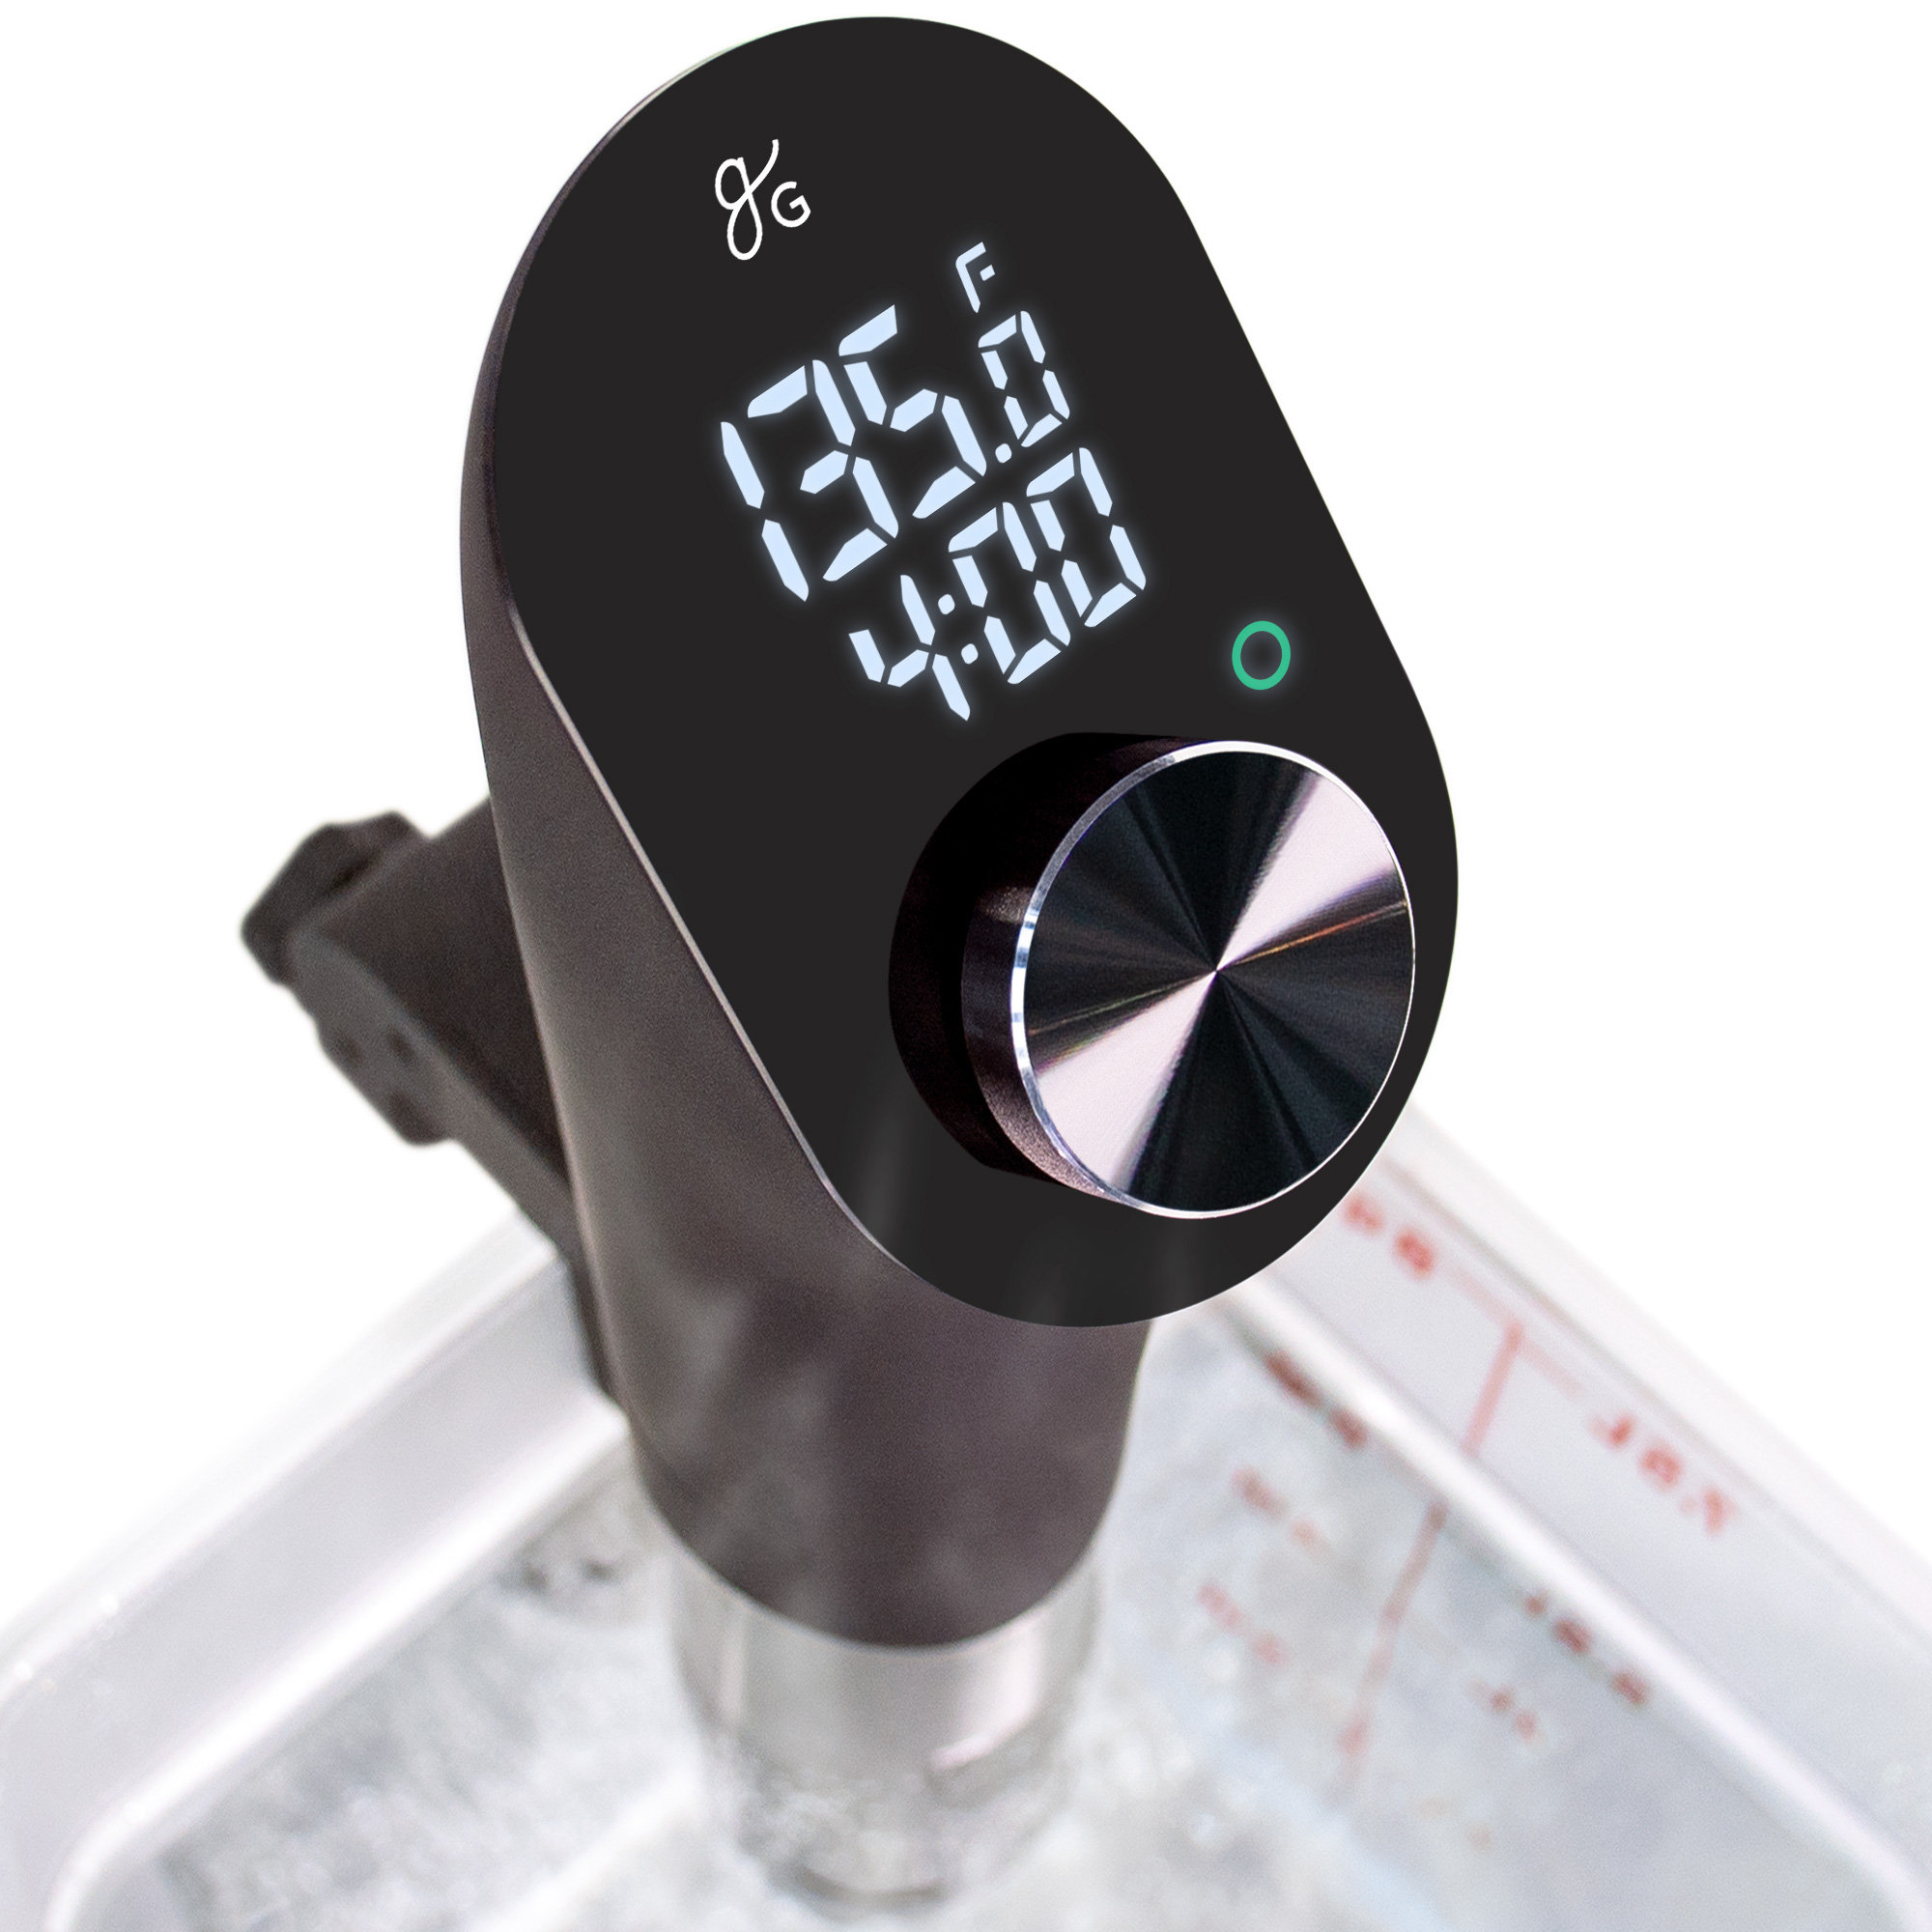 10 Best Sous Vide Machines for 2023 - Top-Rated Sous Vides